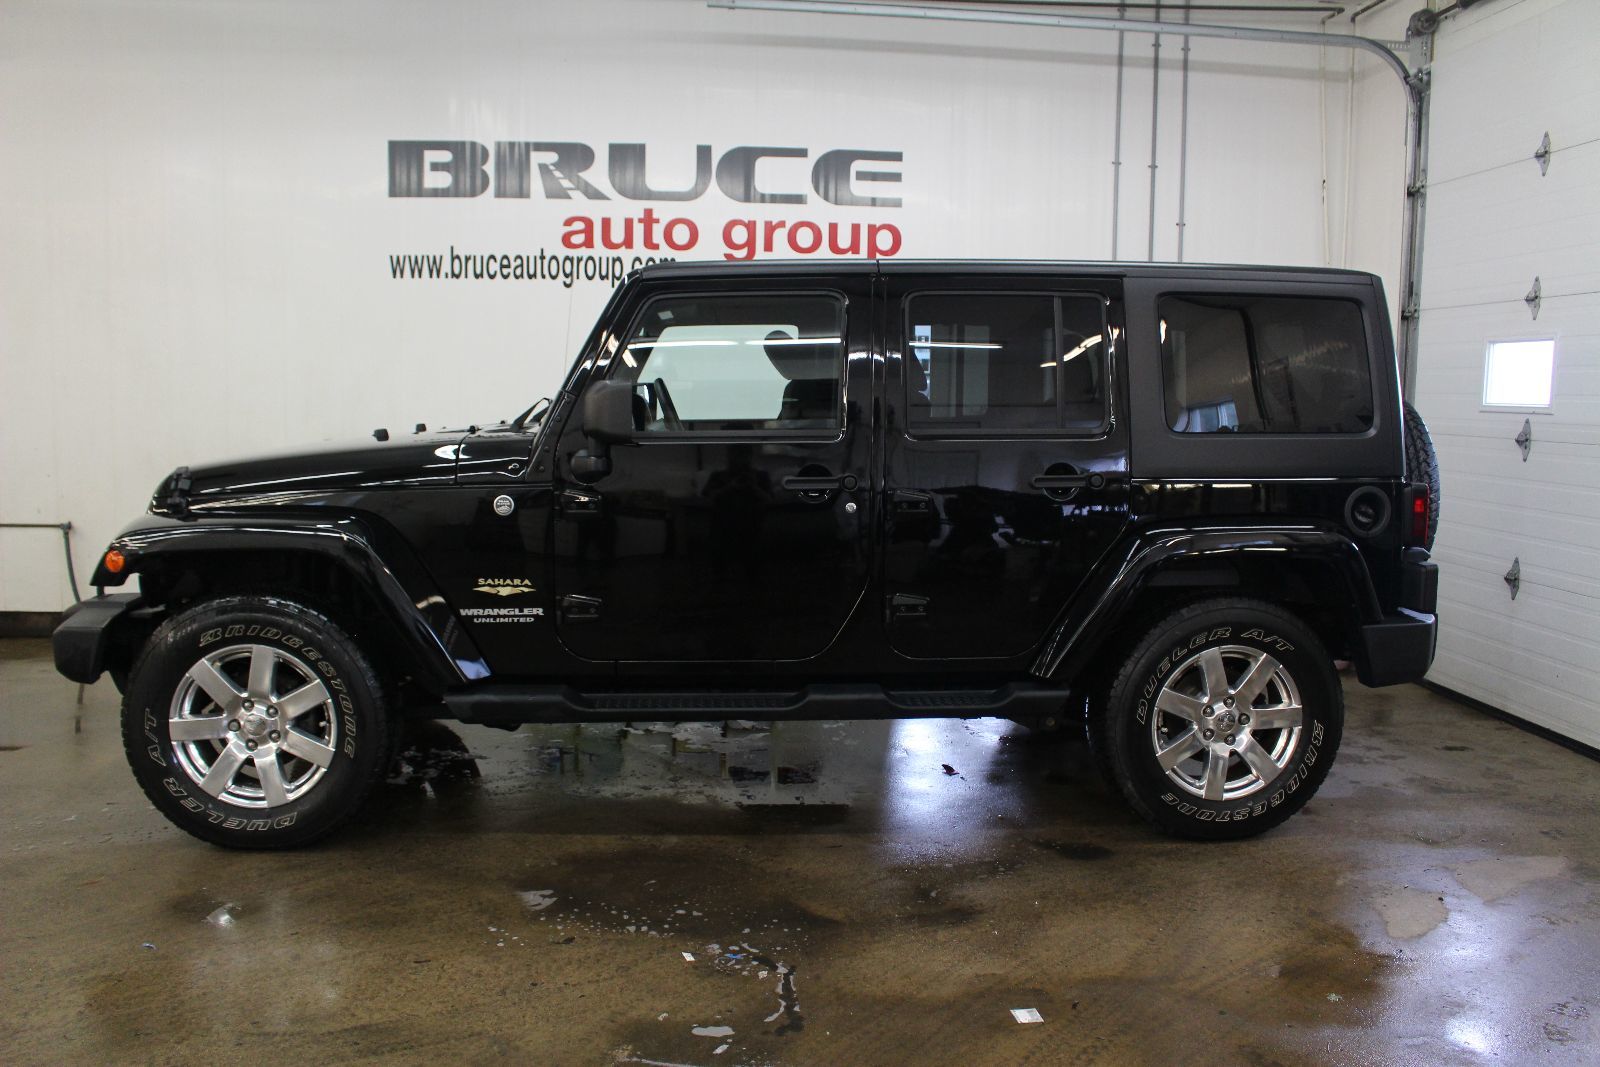 Used 2013 Jeep Wrangler Unlimited Sahara 3.6L 6CYL 4WD MANUAL in ...